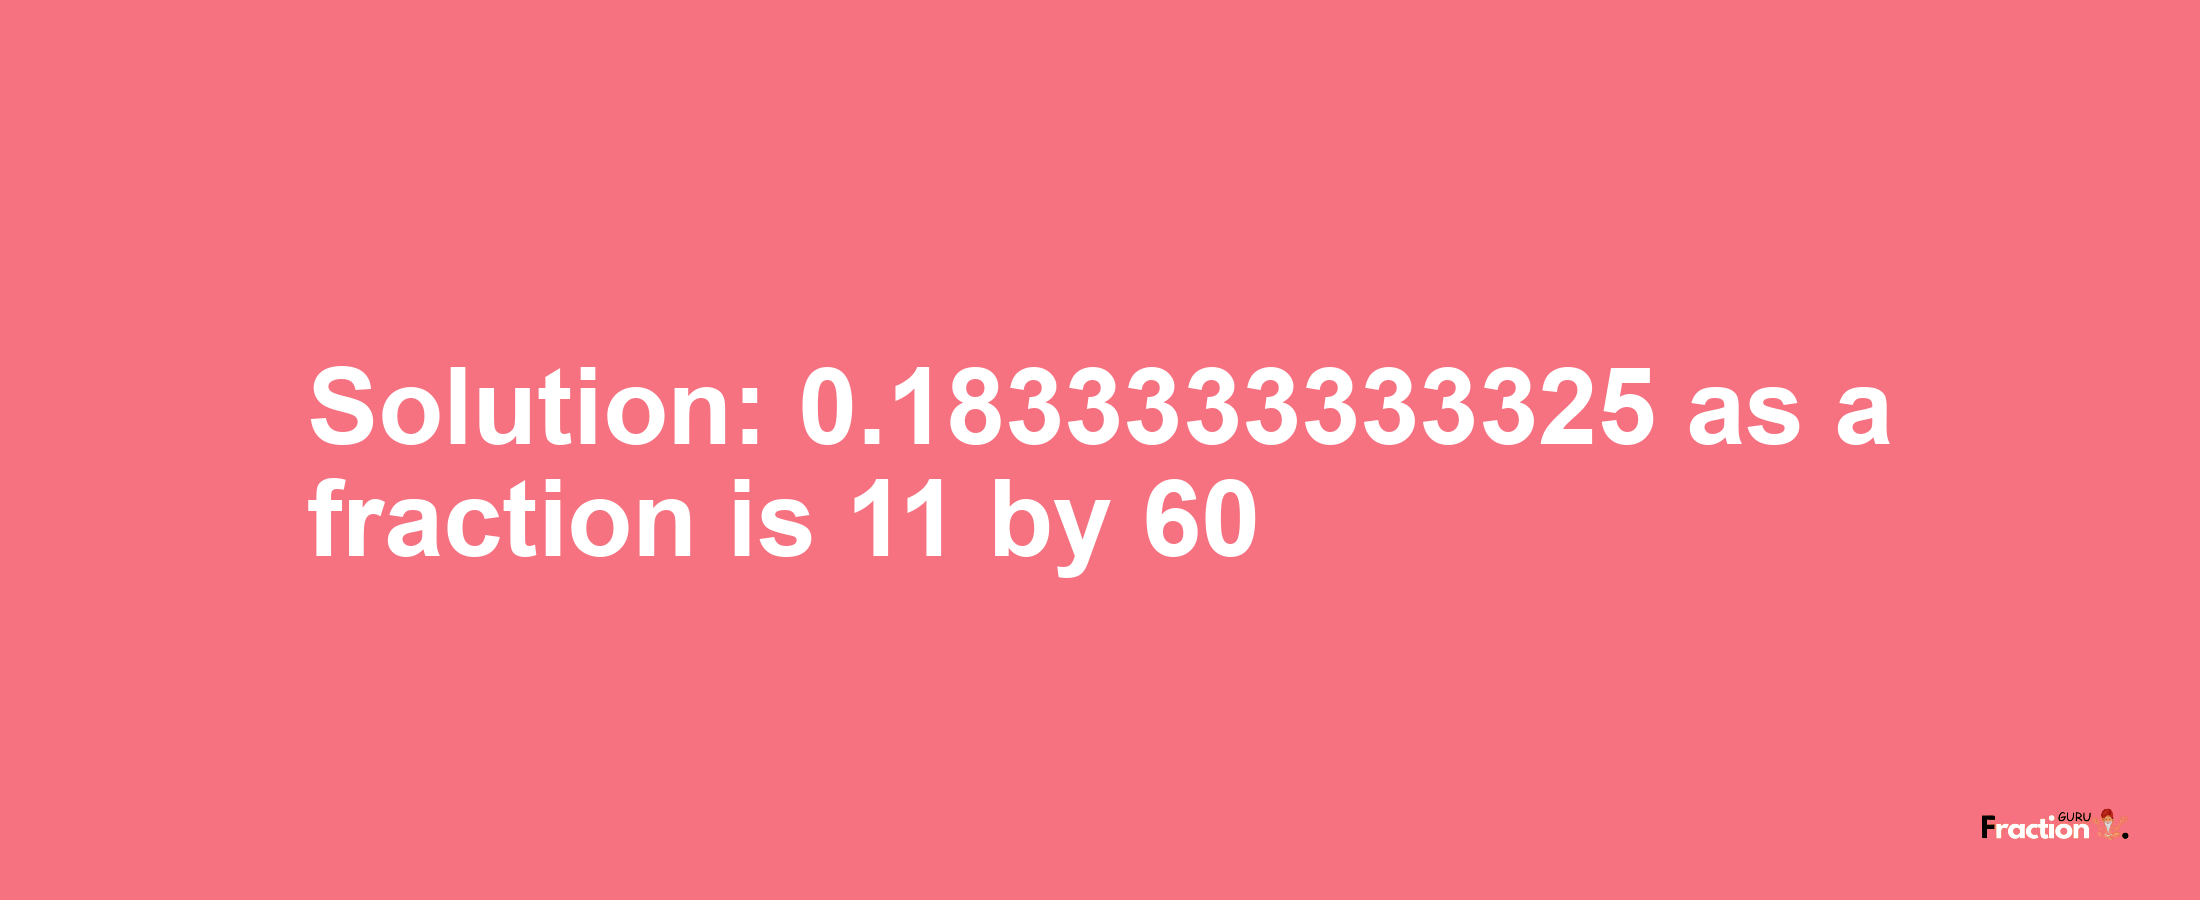 Solution:0.1833333333325 as a fraction is 11/60